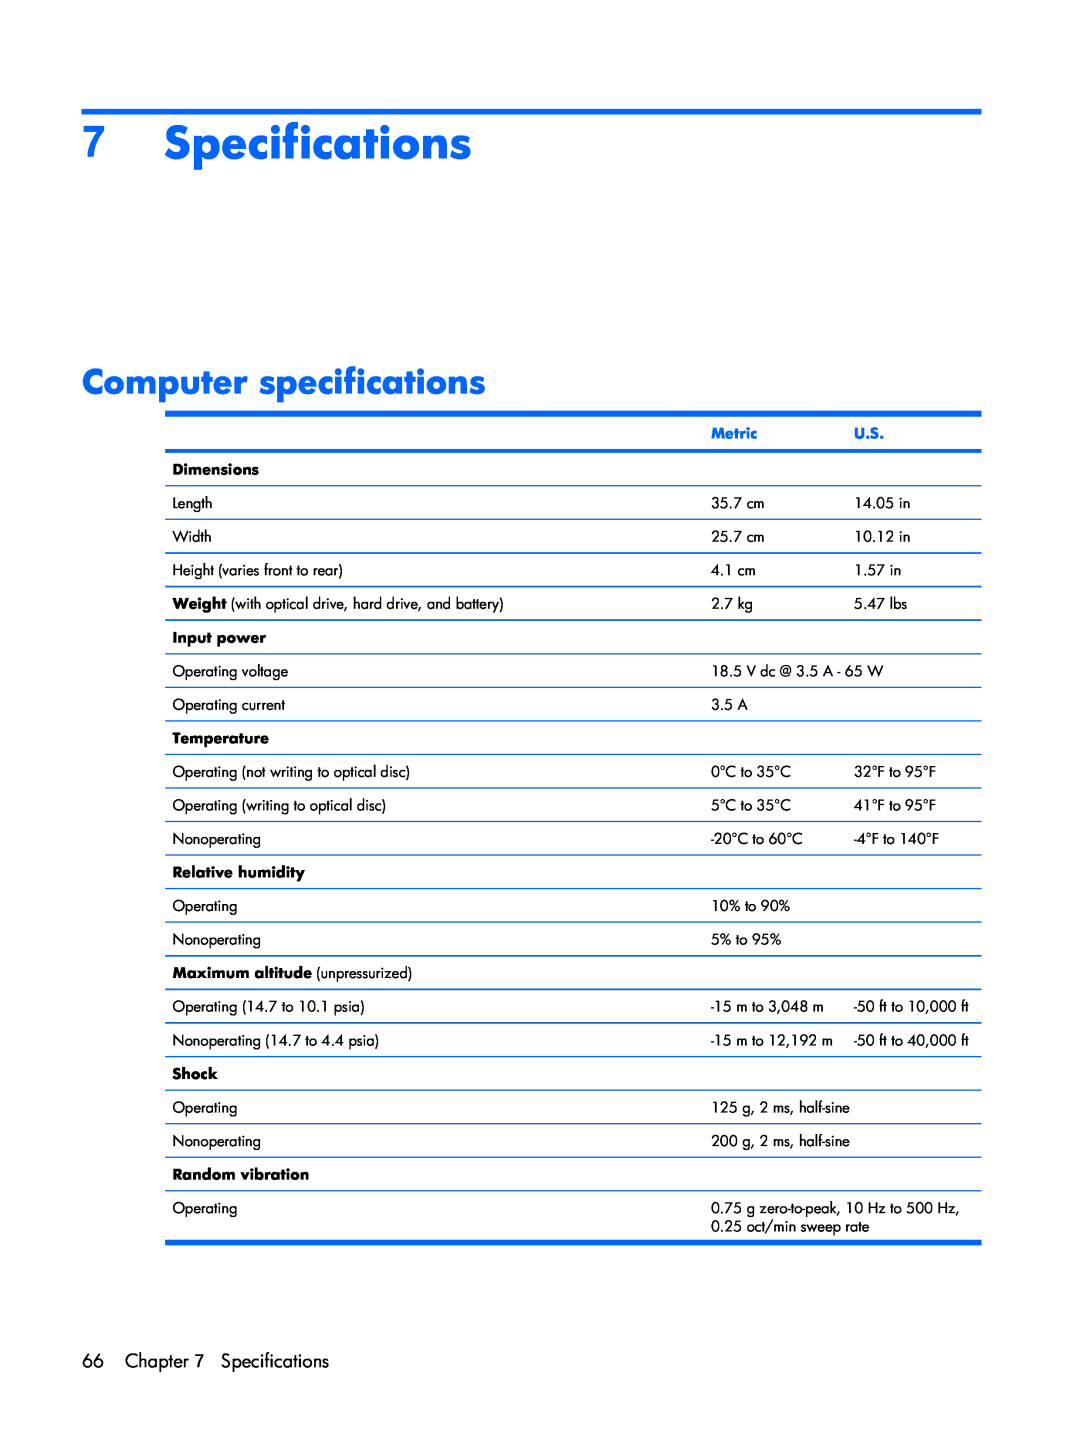 Compaq F500 manual Specifications, Computer specifications, Metric 